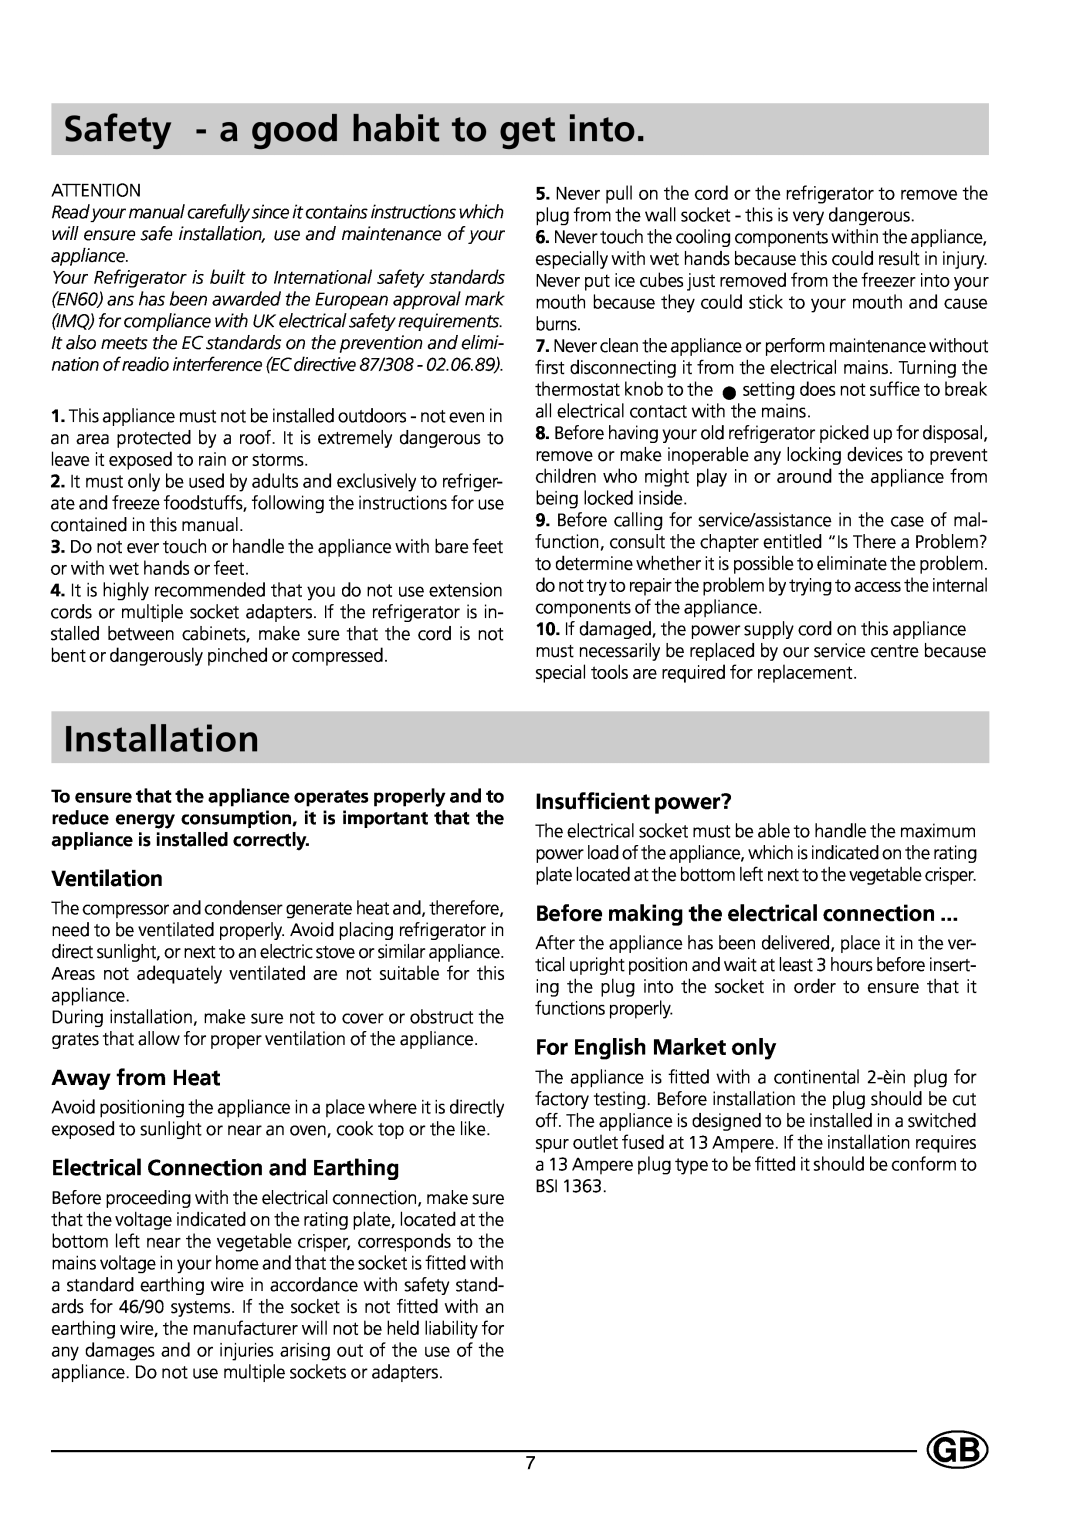 Indesit GE-160 I manual Safety - a good habit to get into, Installation, Ventilation, Away from Heat, Insufficient power? 